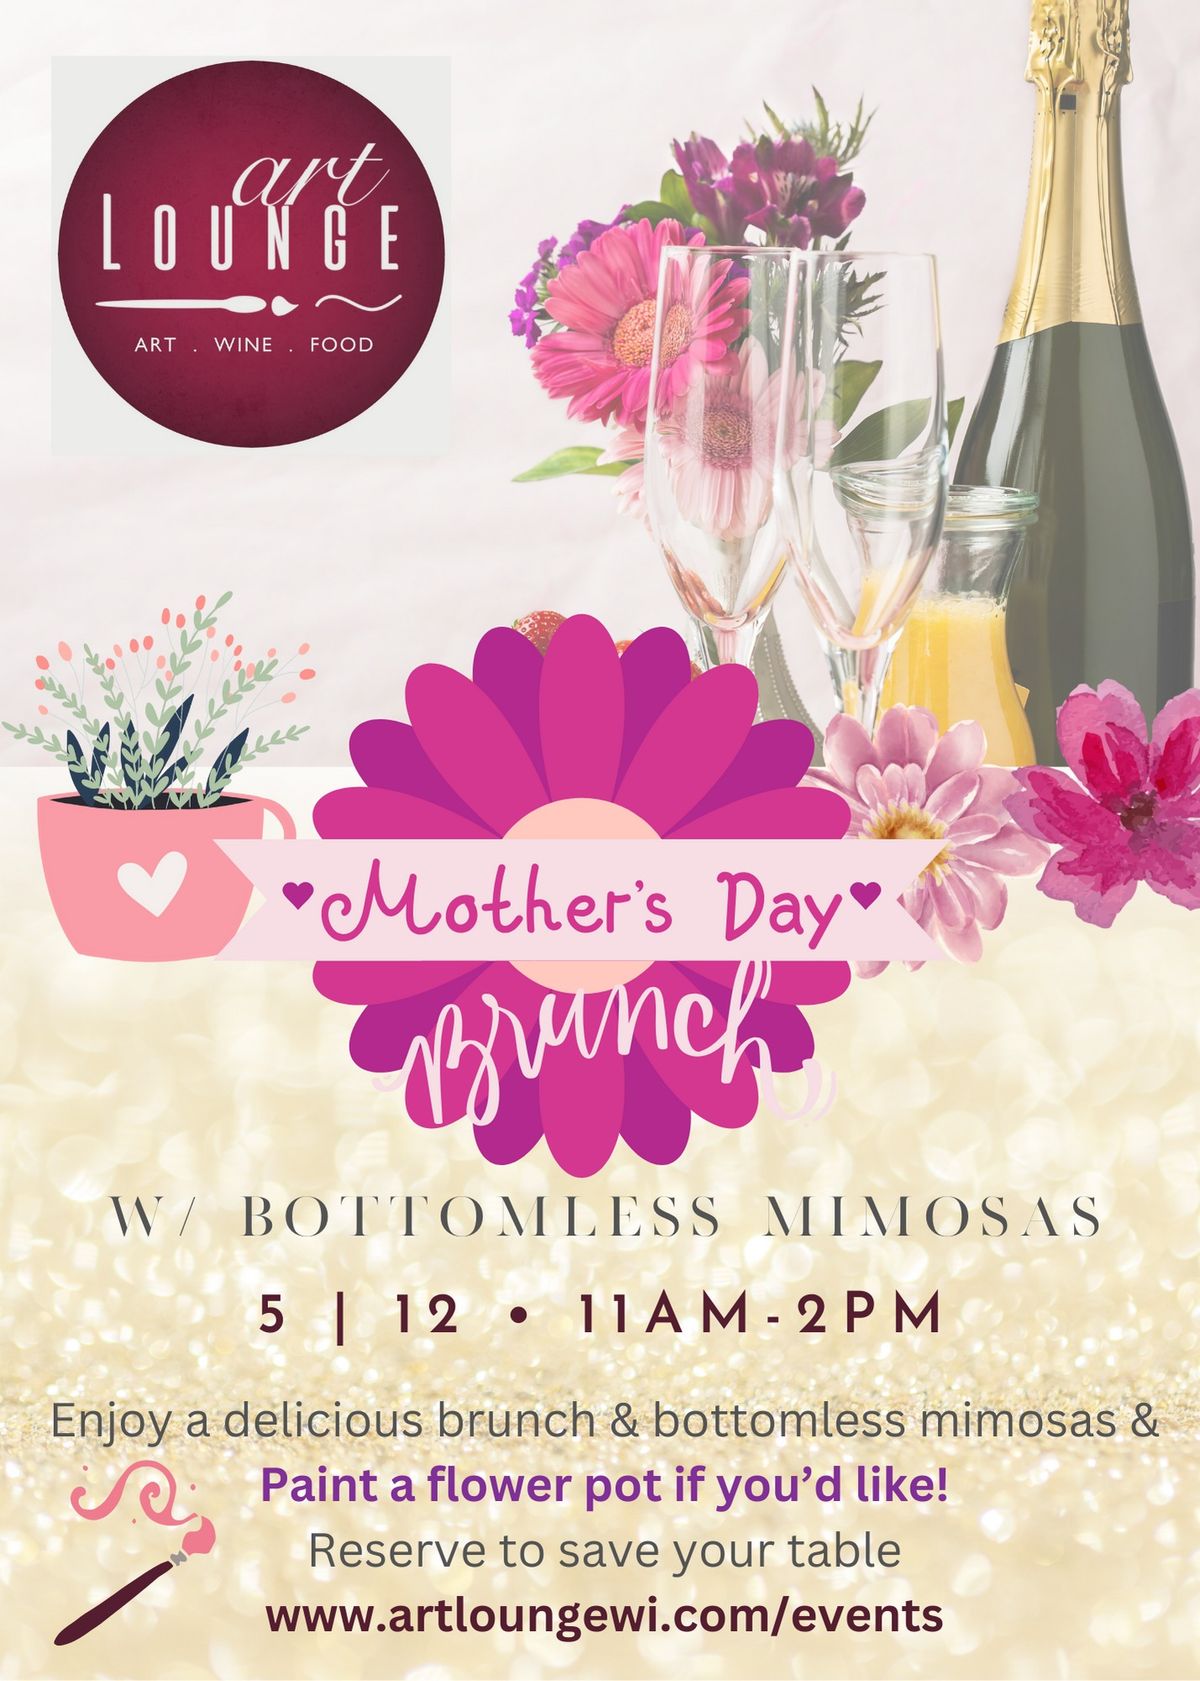 SOLD OUT - Mother's Day Brunch w\/bottomless mimosas & paint a Flower pot!